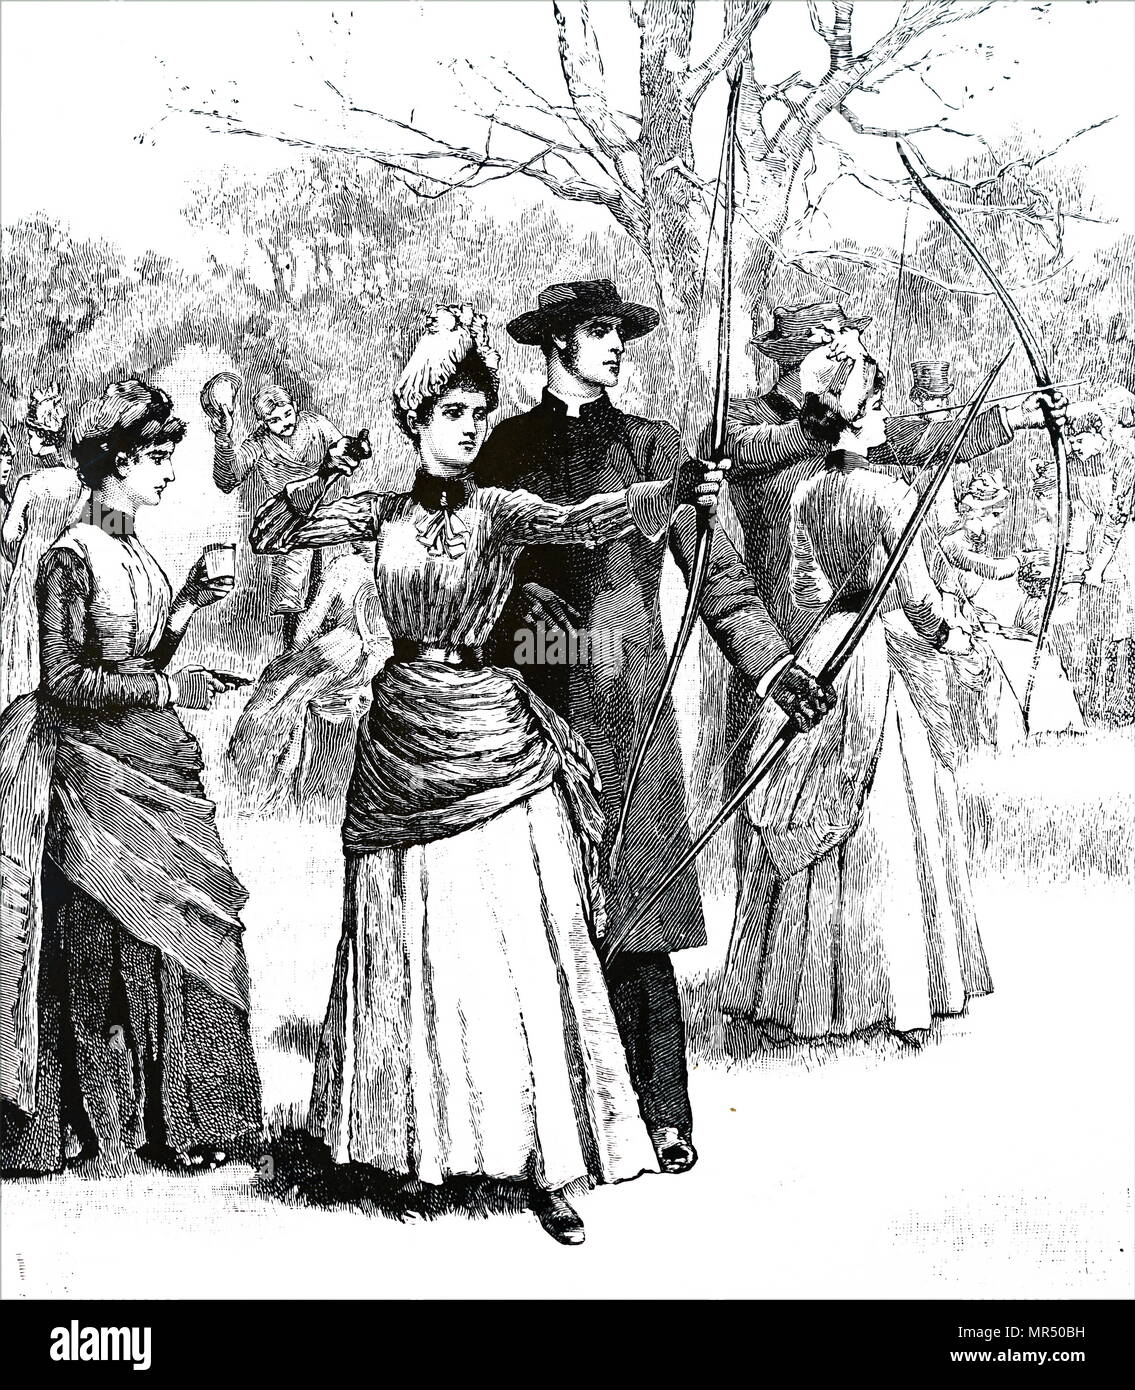 Engraving depicting young ladies practising their archery skills. Dated 19th century Stock Photo